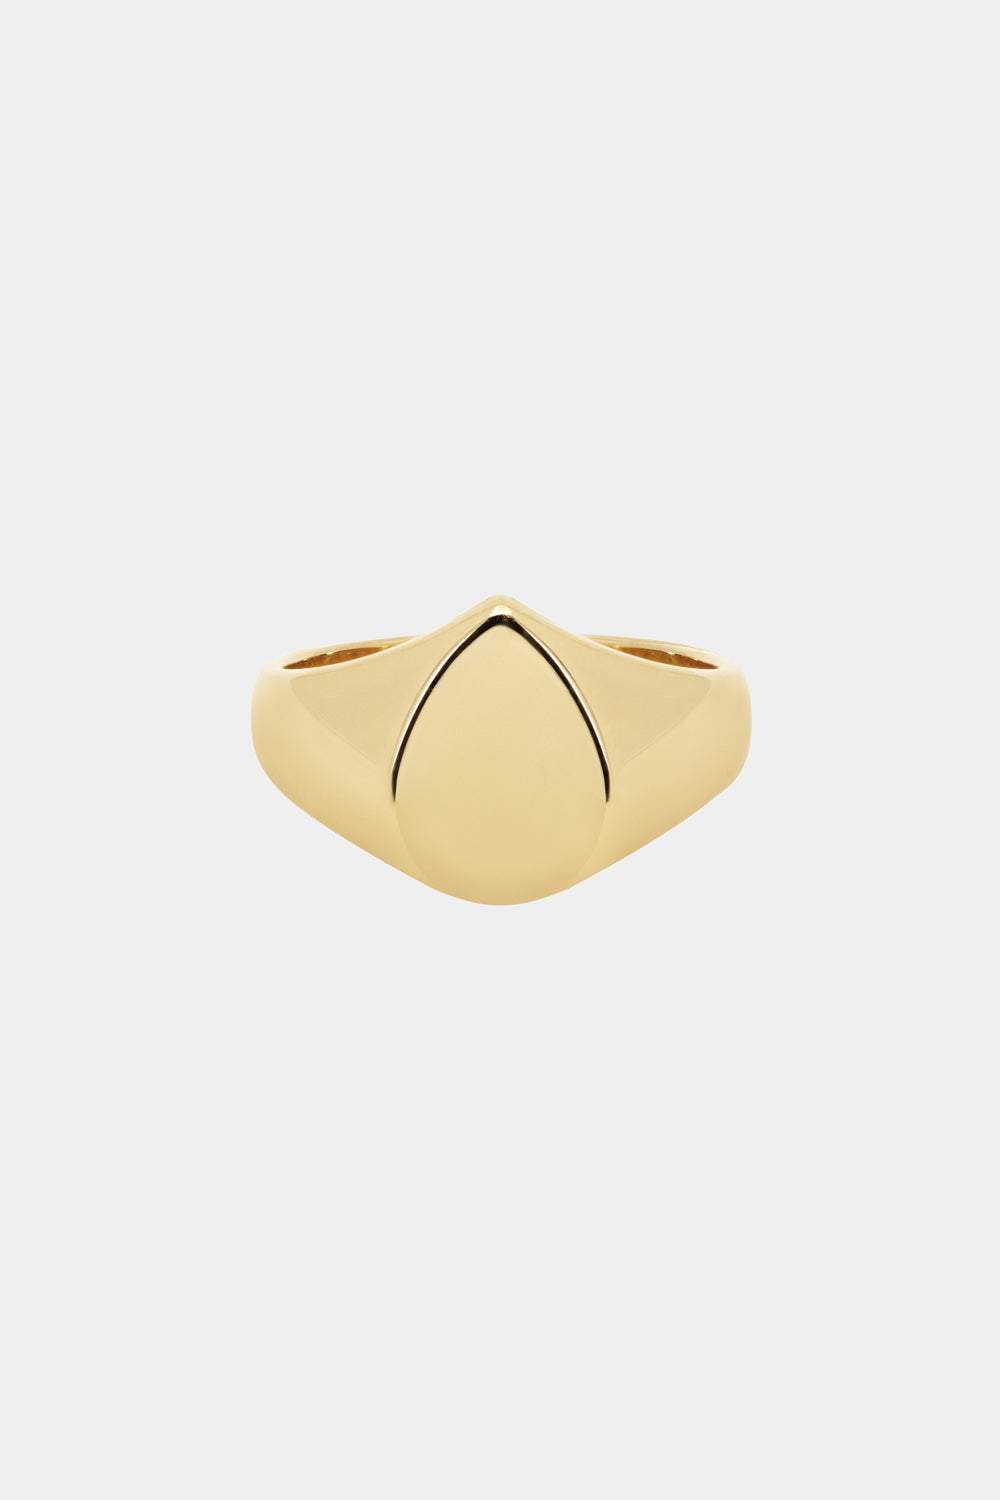 Pear Signet Ring | Yellow Gold, More Options Available| Natasha Schweitzer